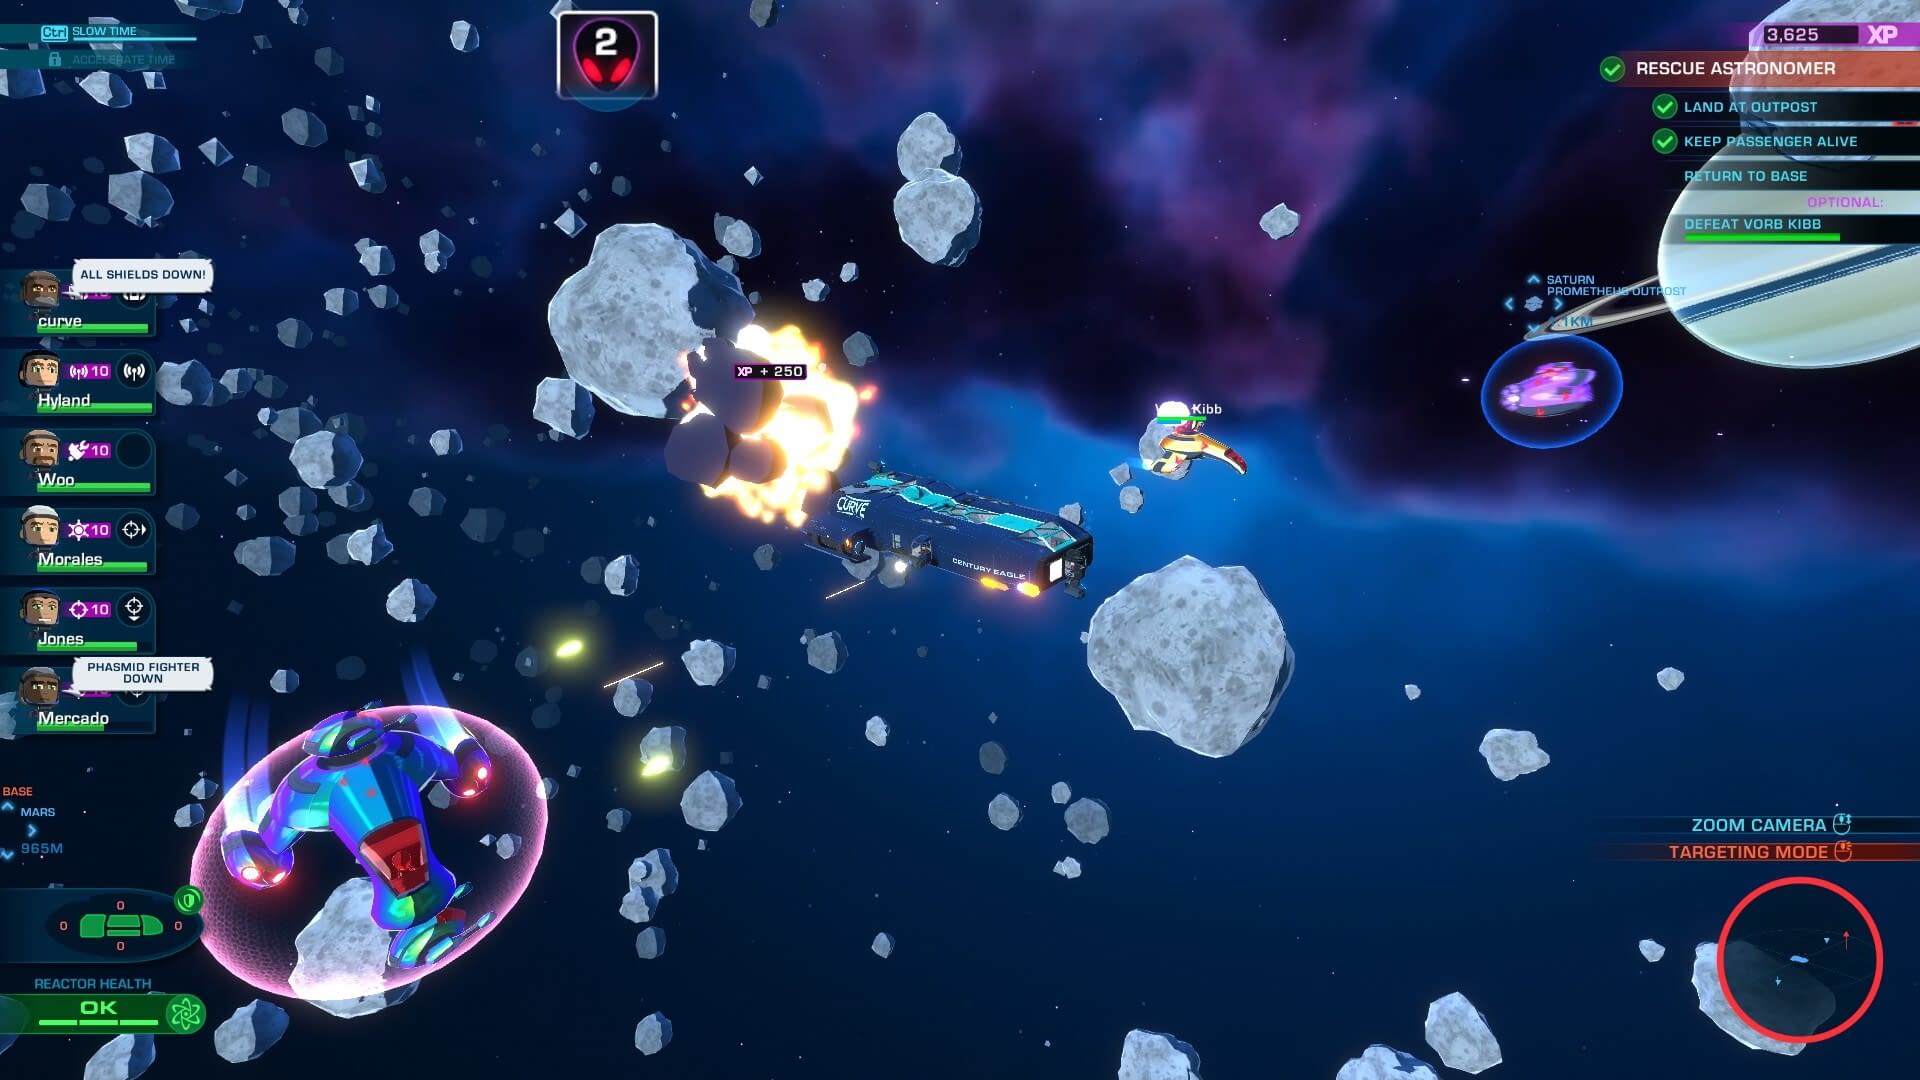 Indie Simulator Game Space Crew Launches Demo On Steam